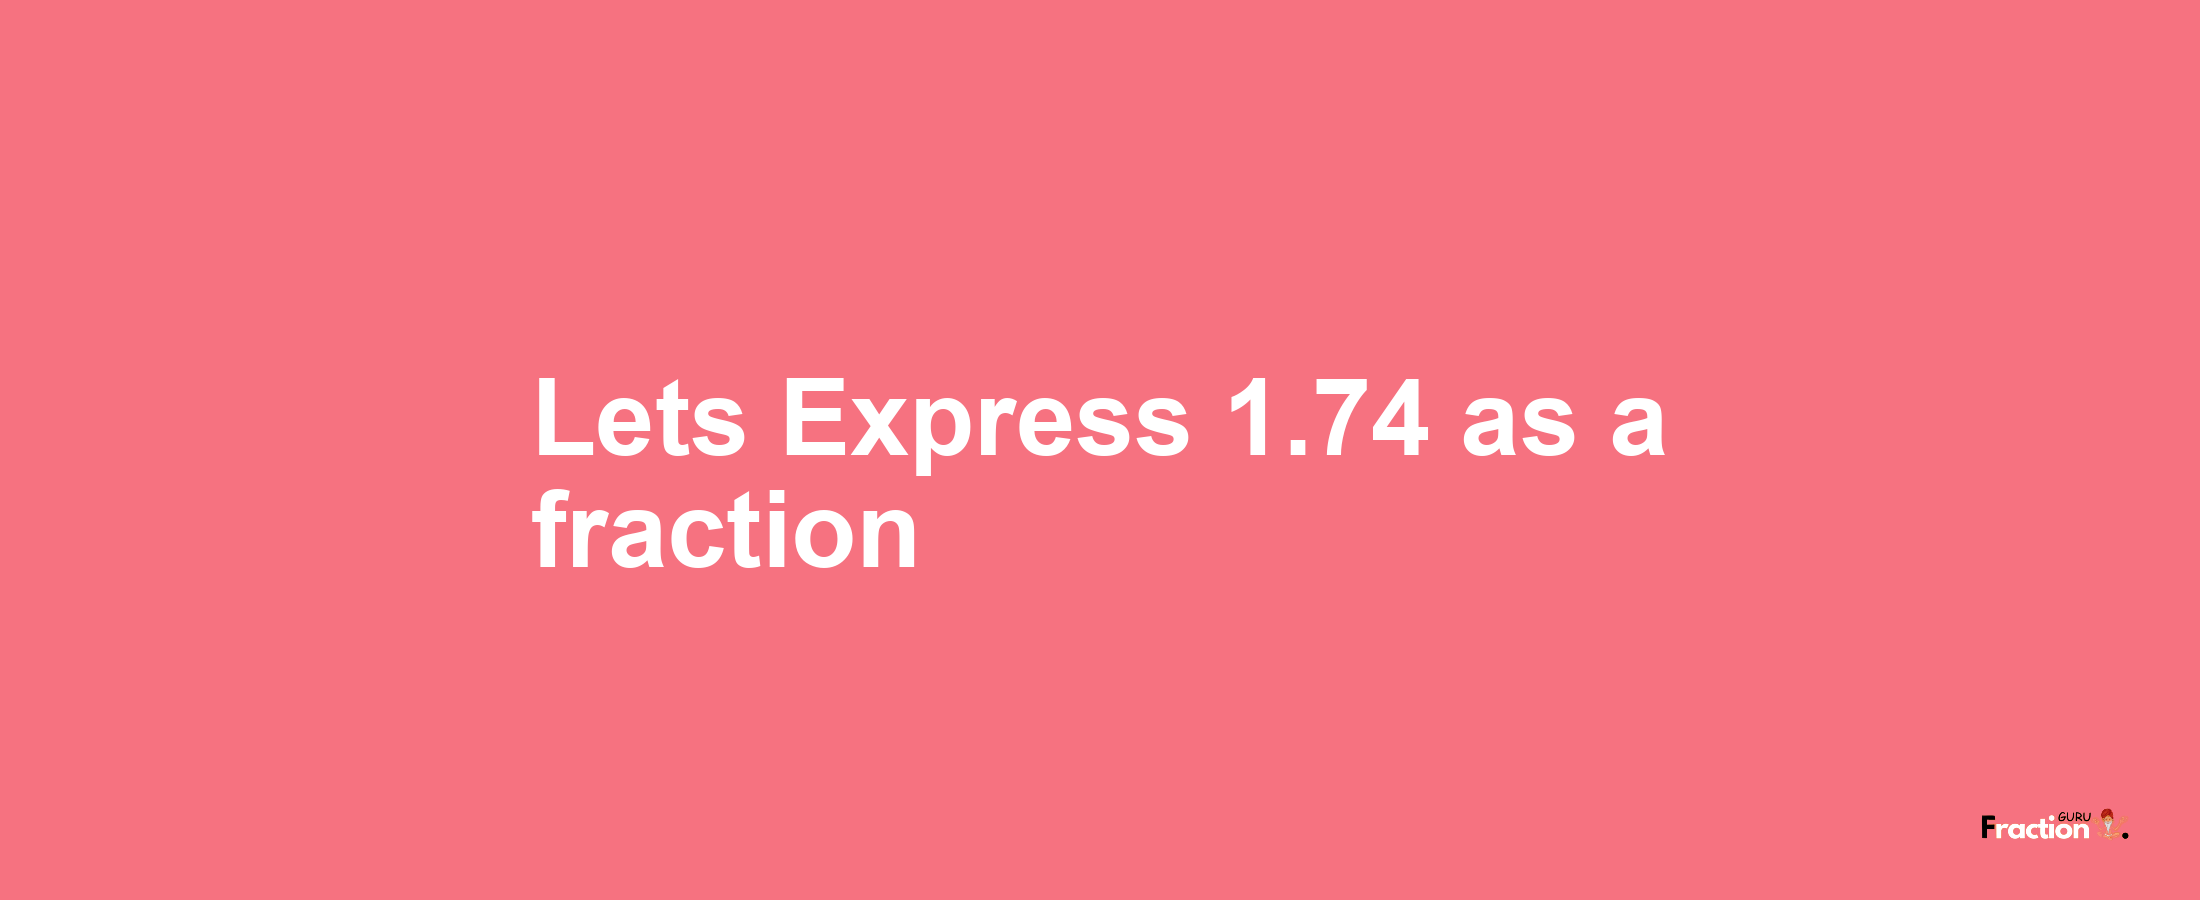 Lets Express 1.74 as afraction